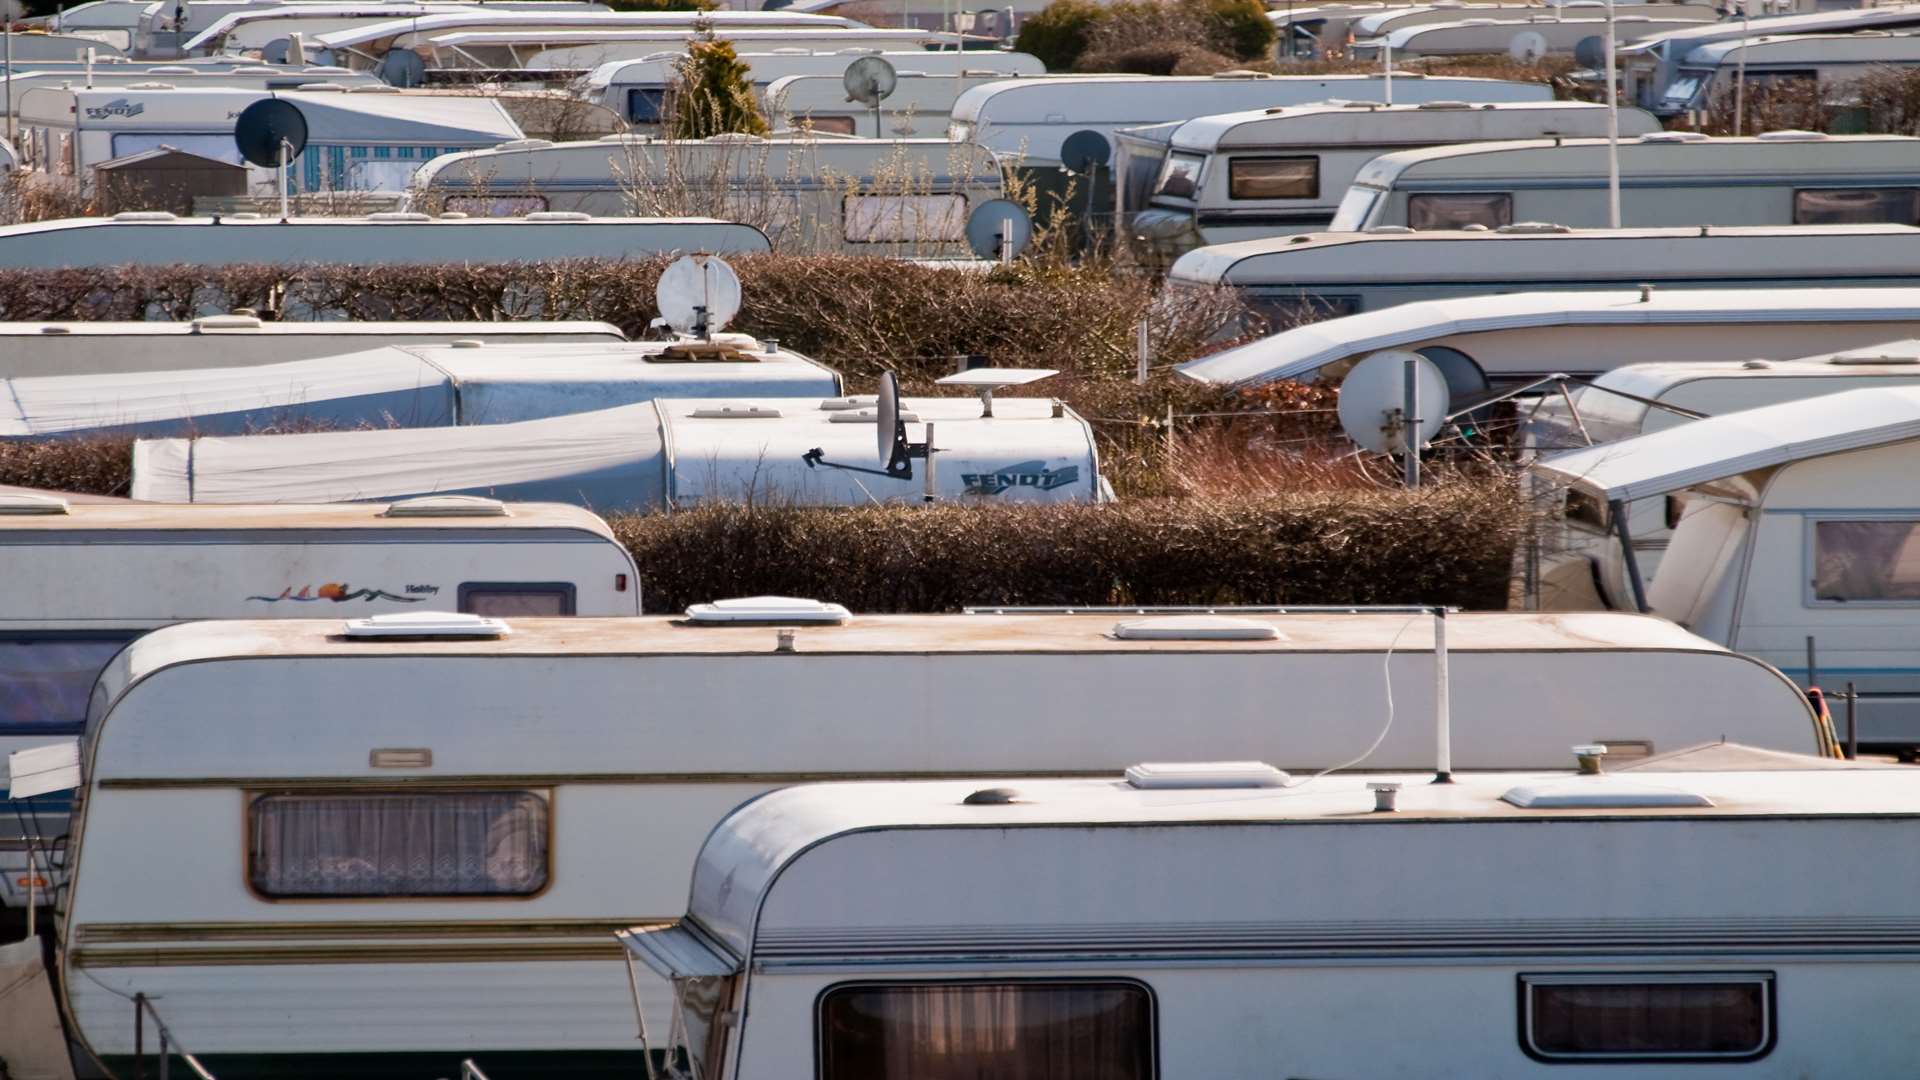 Caravans have pitched up on Castle Way. Stock image.